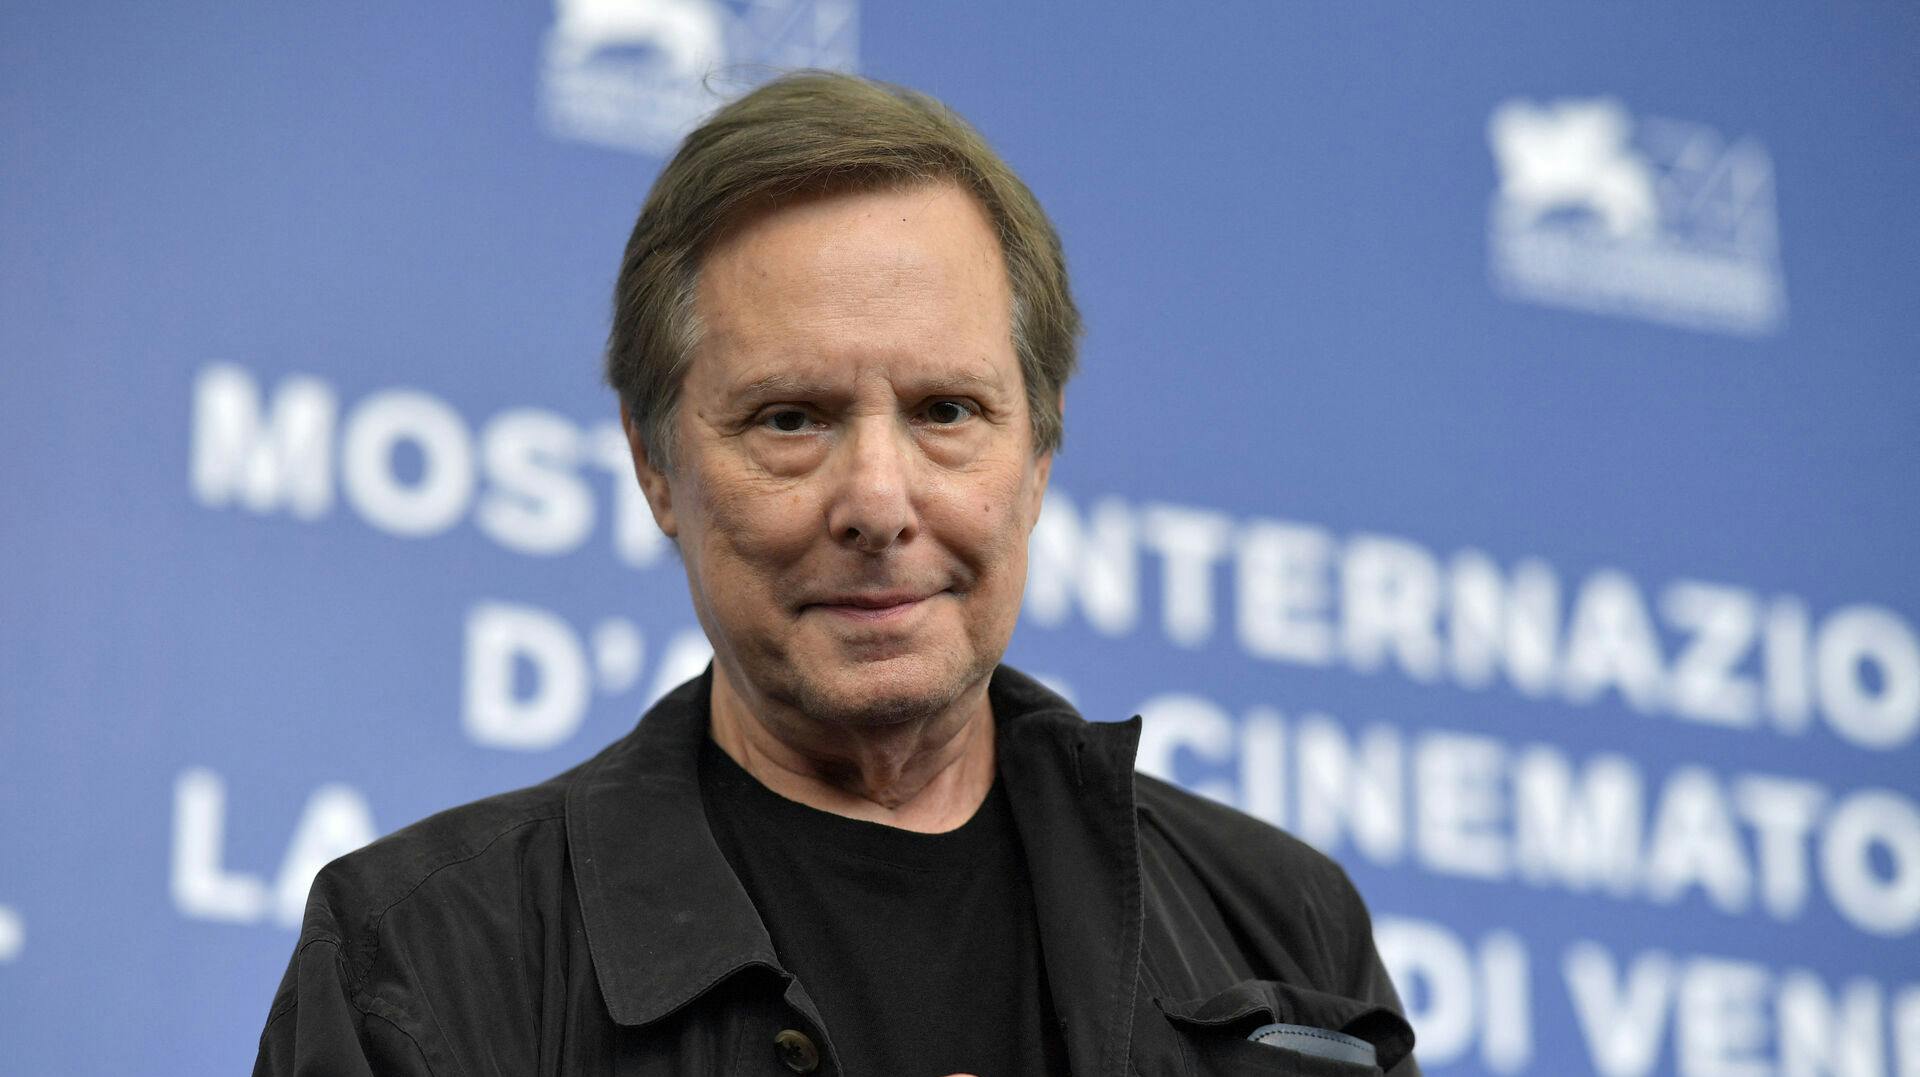 Director William Friedkin attends a photocall of the movie "The Devil and Father Amorth" presented out of competition during the 74th Venice Film Festival on August 31, 2017 at Venice Lido. Tiziana FABI / AFP